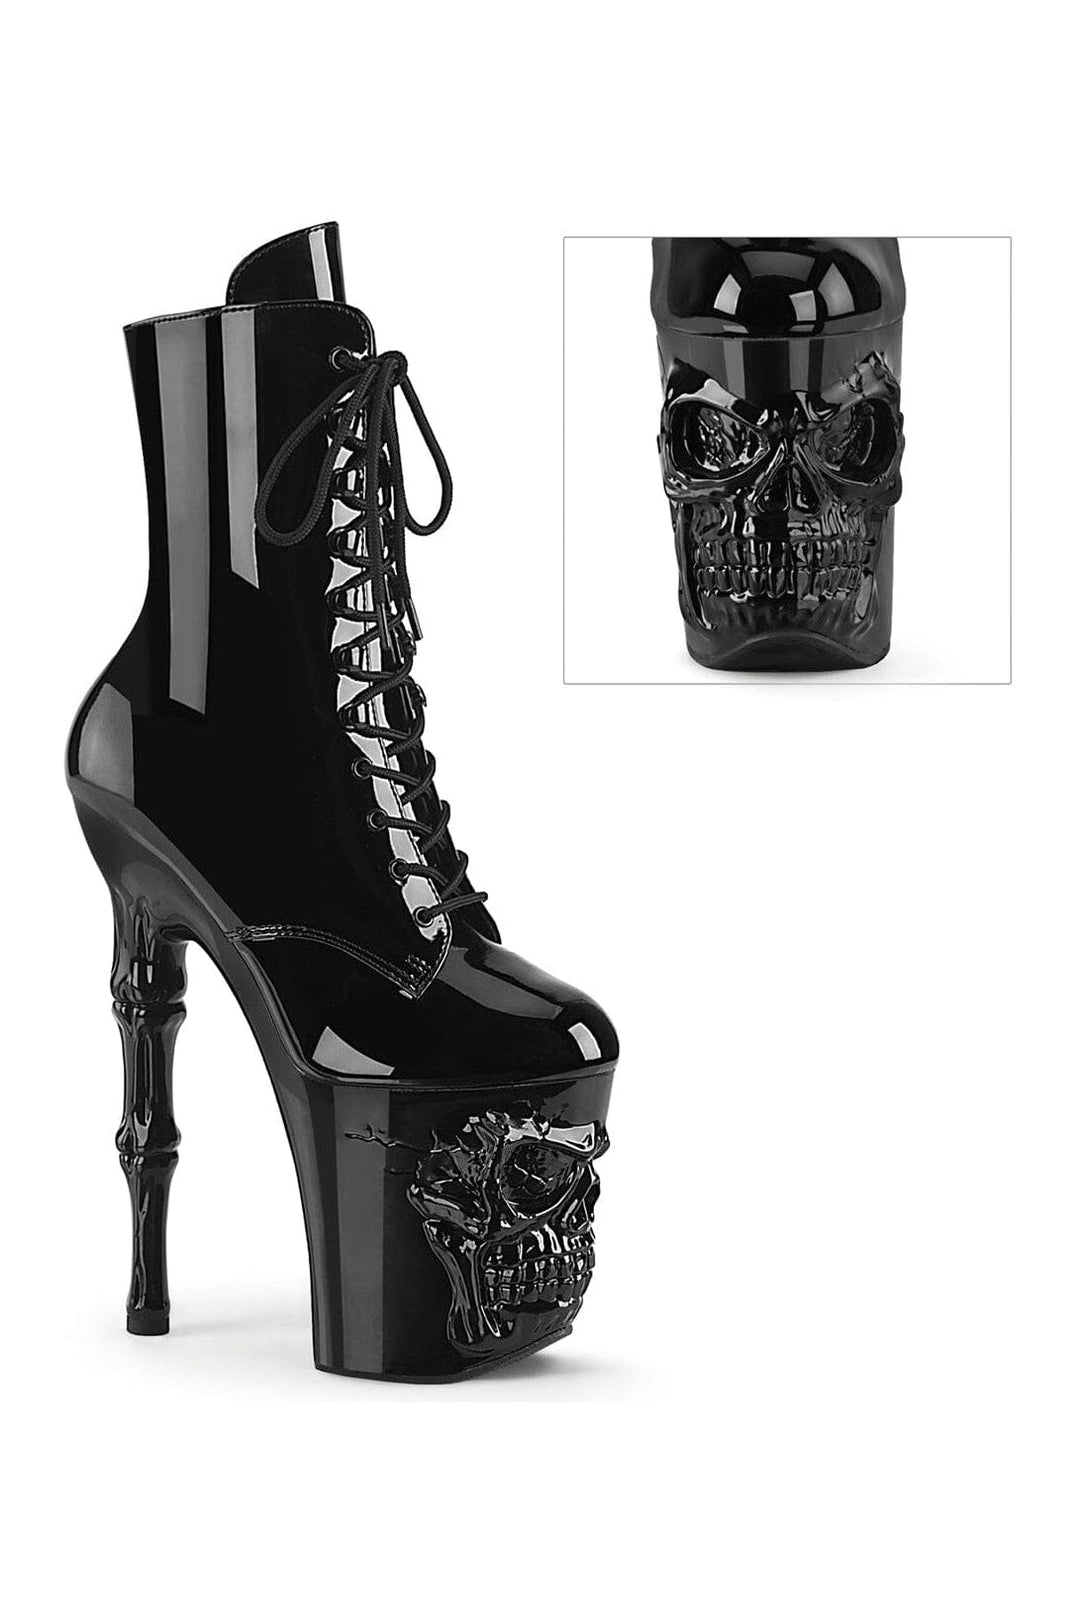 RAPTURE-1020 Black Patent Ankle Boot-Ankle Boots-Pleaser-Black-10-Patent-SEXYSHOES.COM